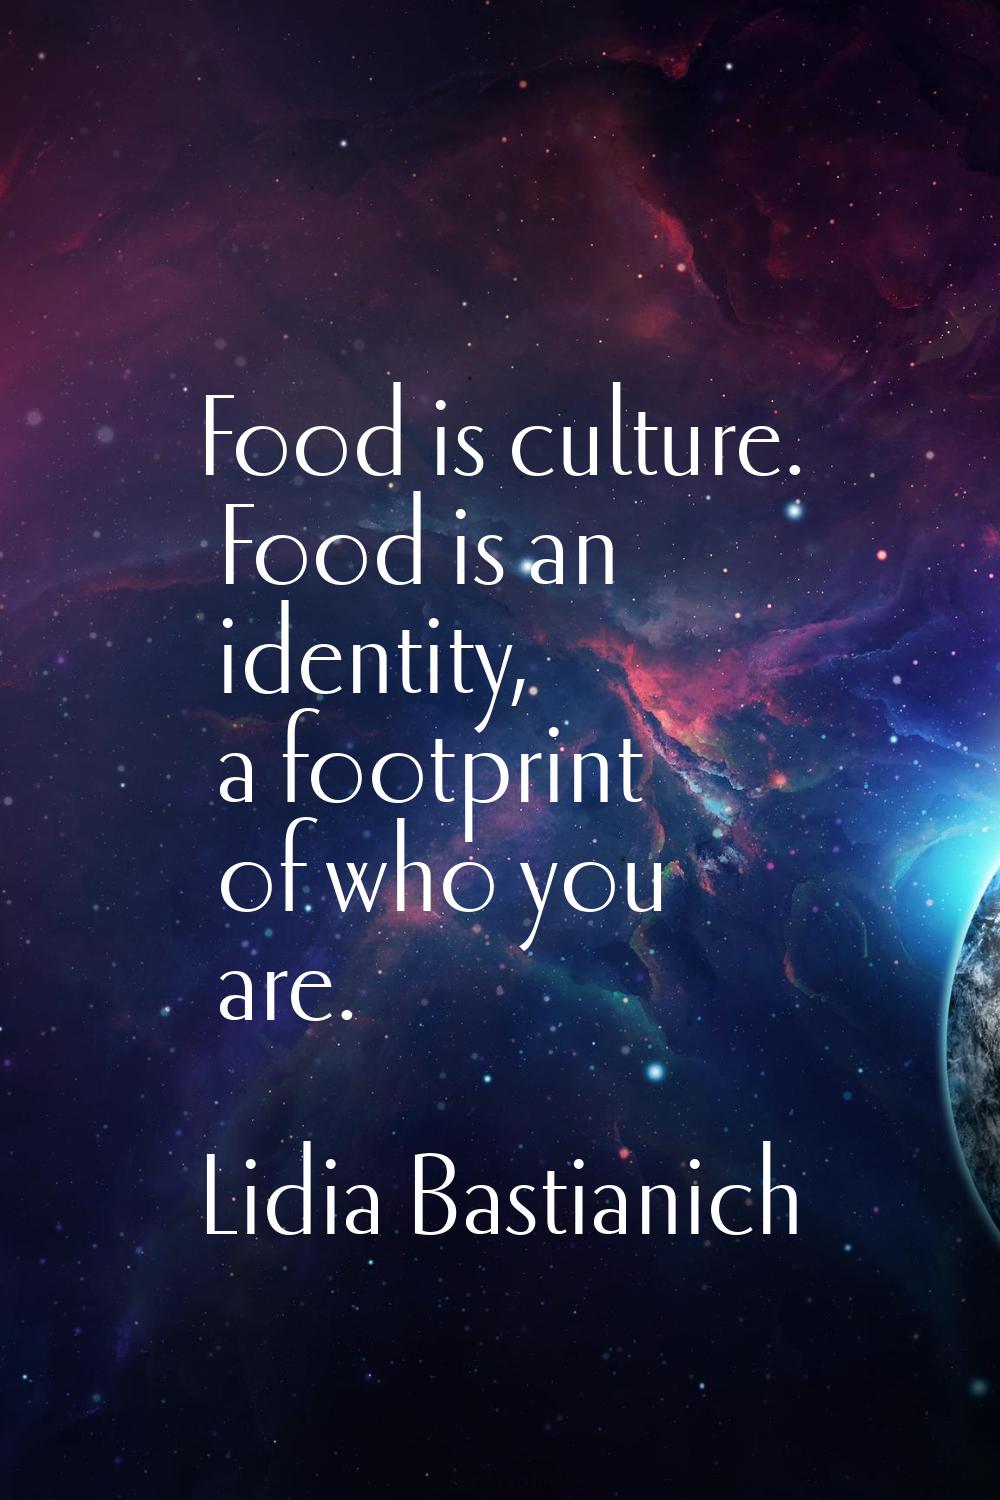 Food is culture. Food is an identity, a footprint of who you are.